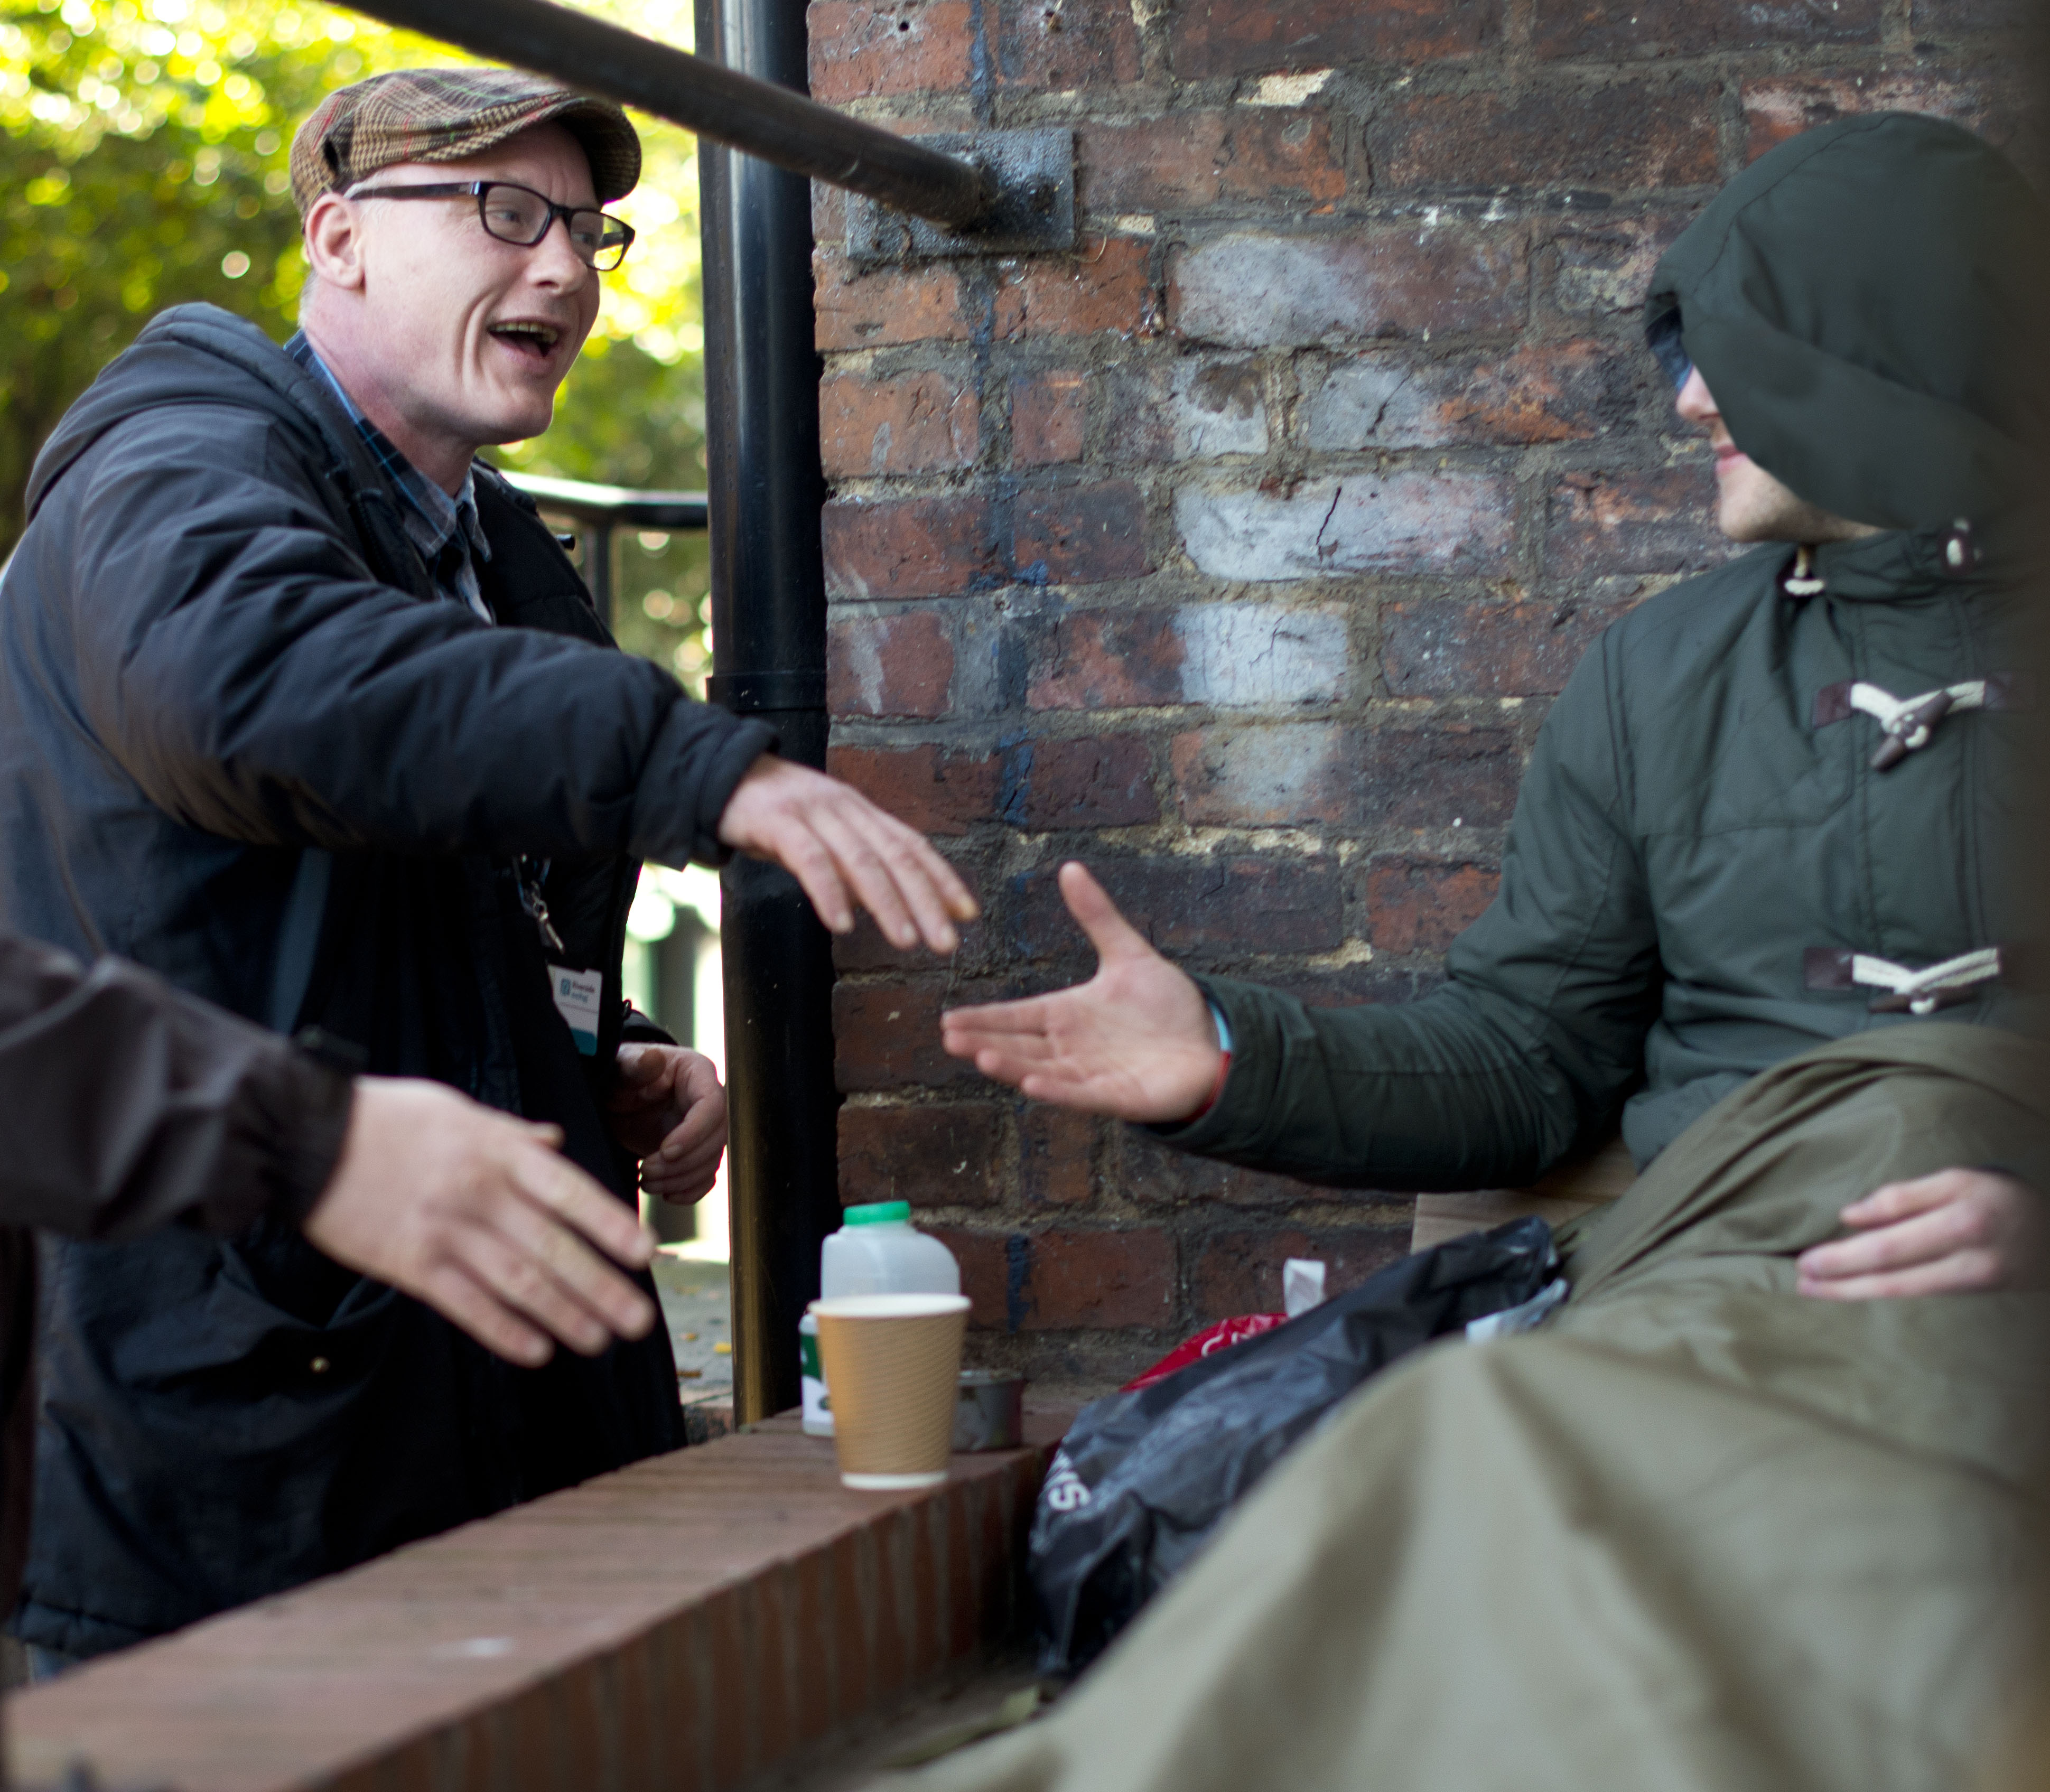 A Riverside Care and Support outreach worker talks to a rough sleeper.